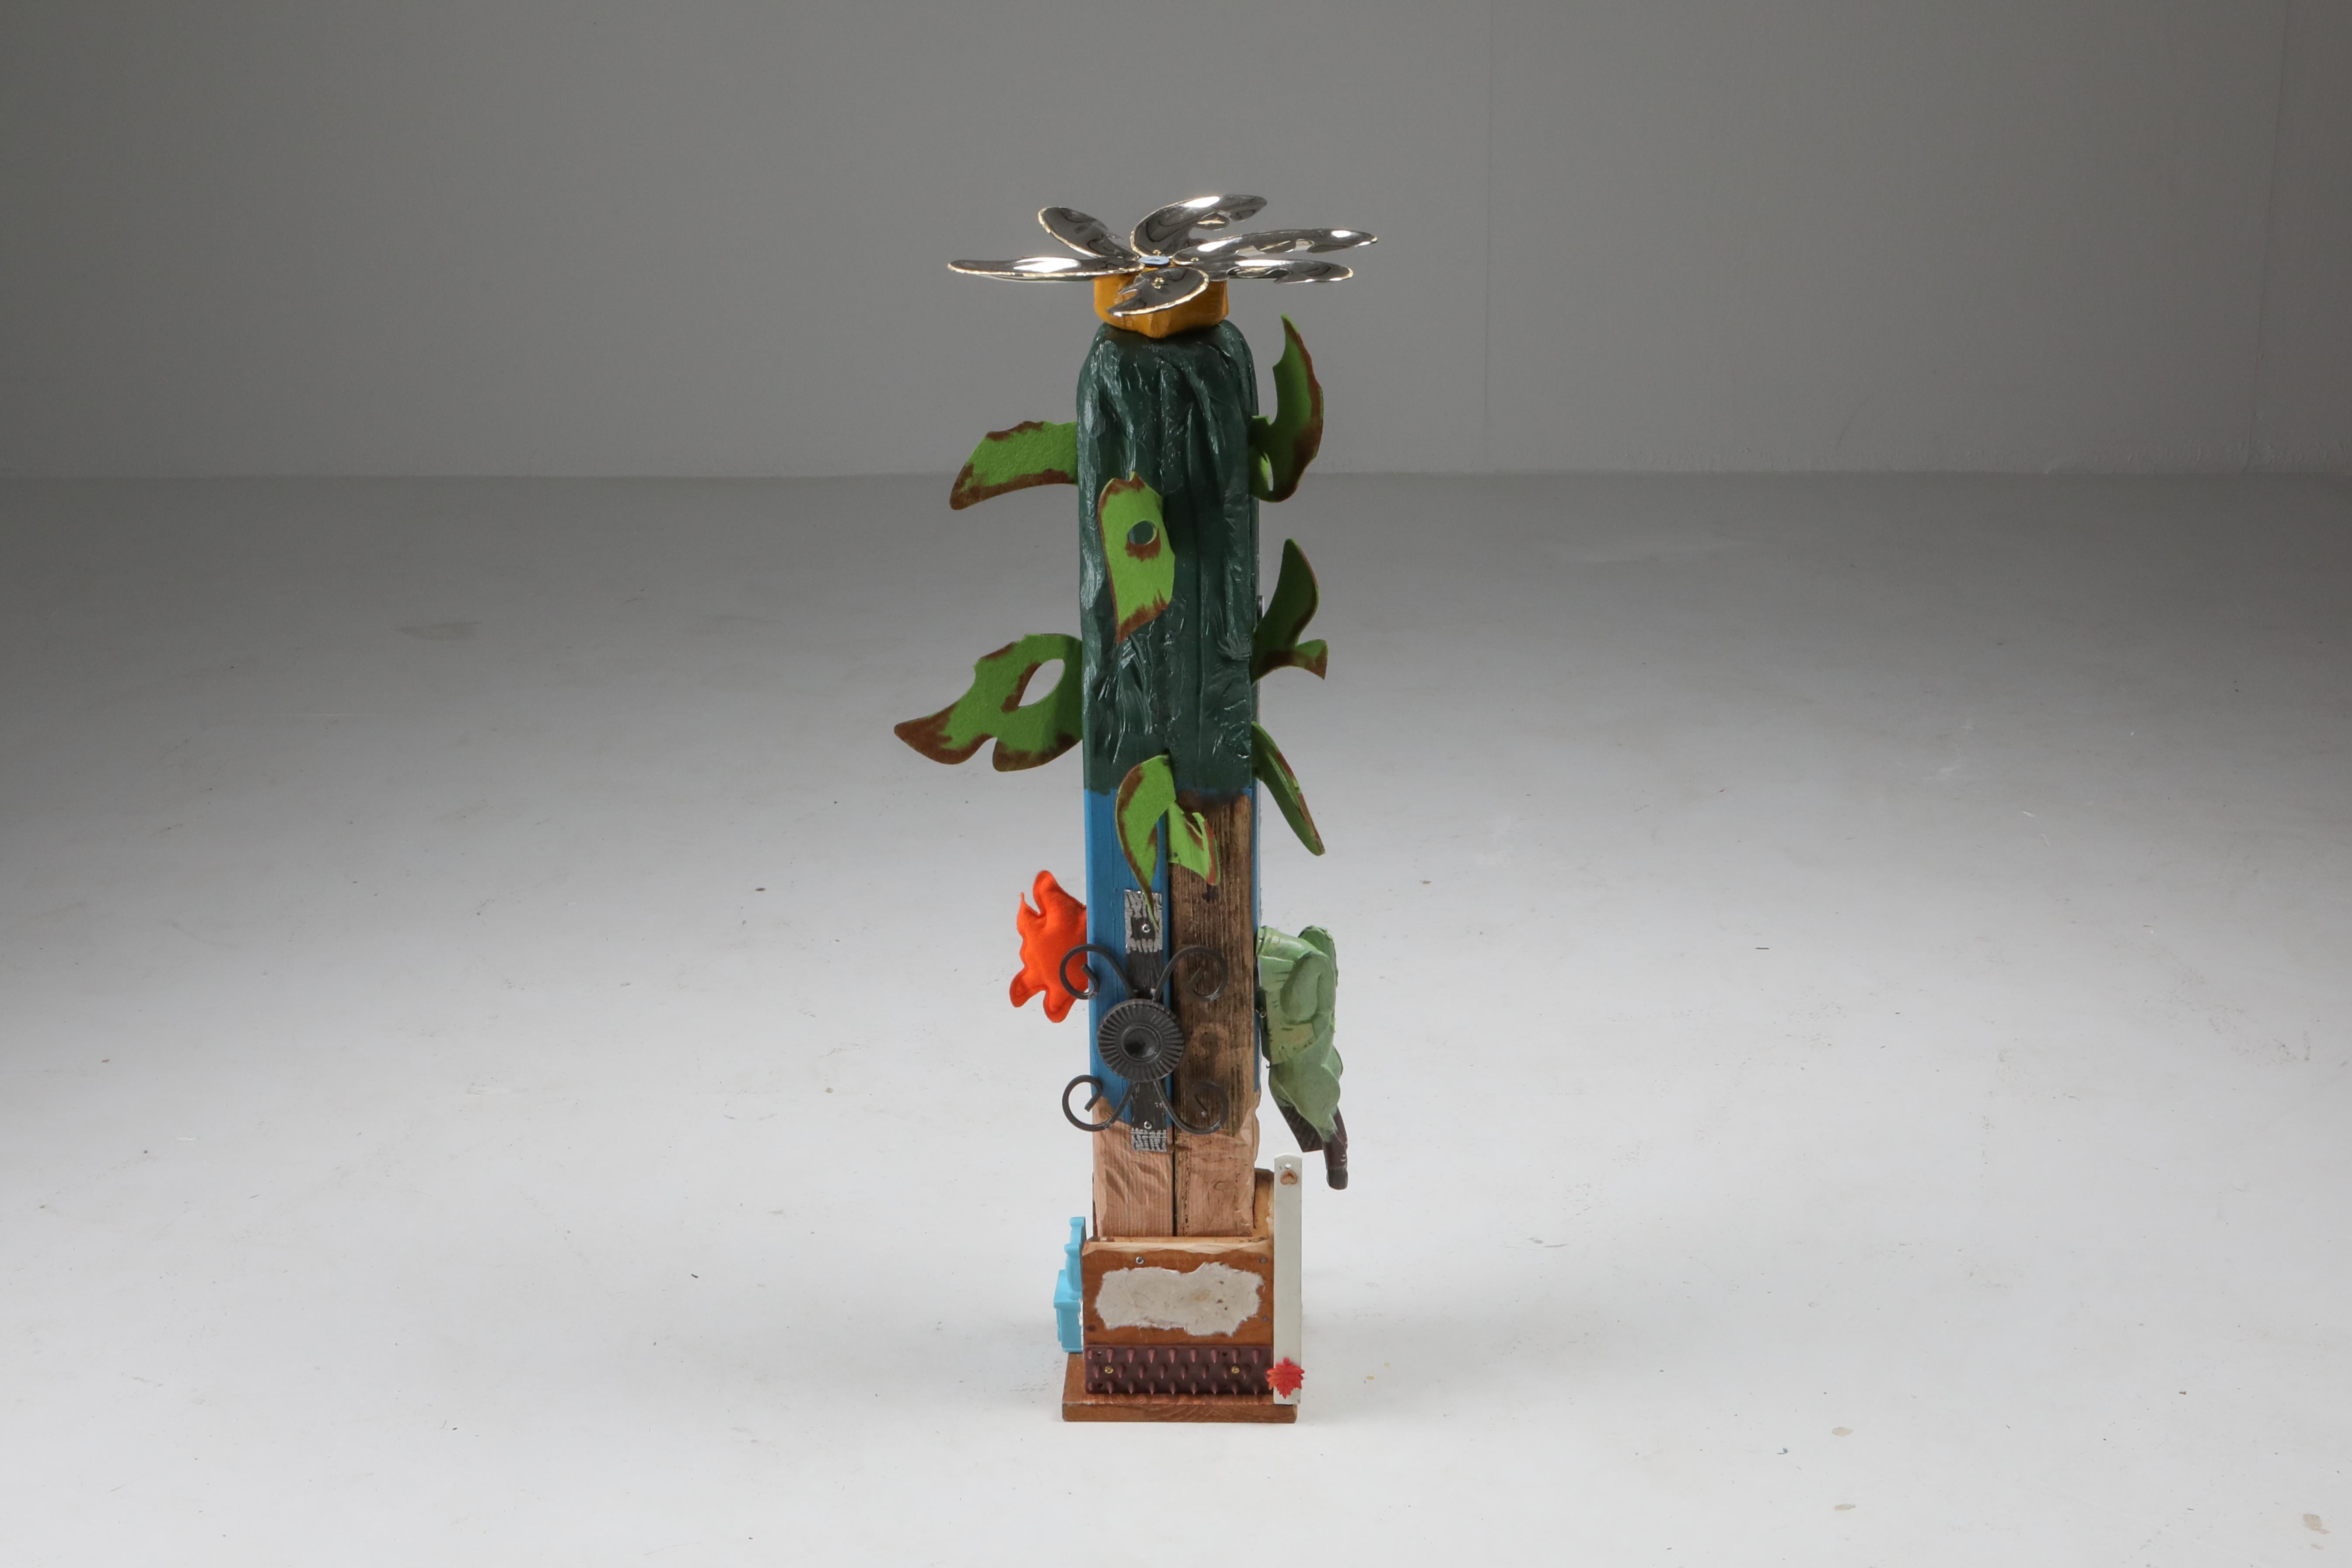 Contemporary mixed-media sculpture, collage art, Messgewand, 2019, France

Jack is a contemporary functional art object created by Messgewand, the duo of Alexis Bondoux and Romain Coppin. The one -of a kind item was part of the solo exhibition in